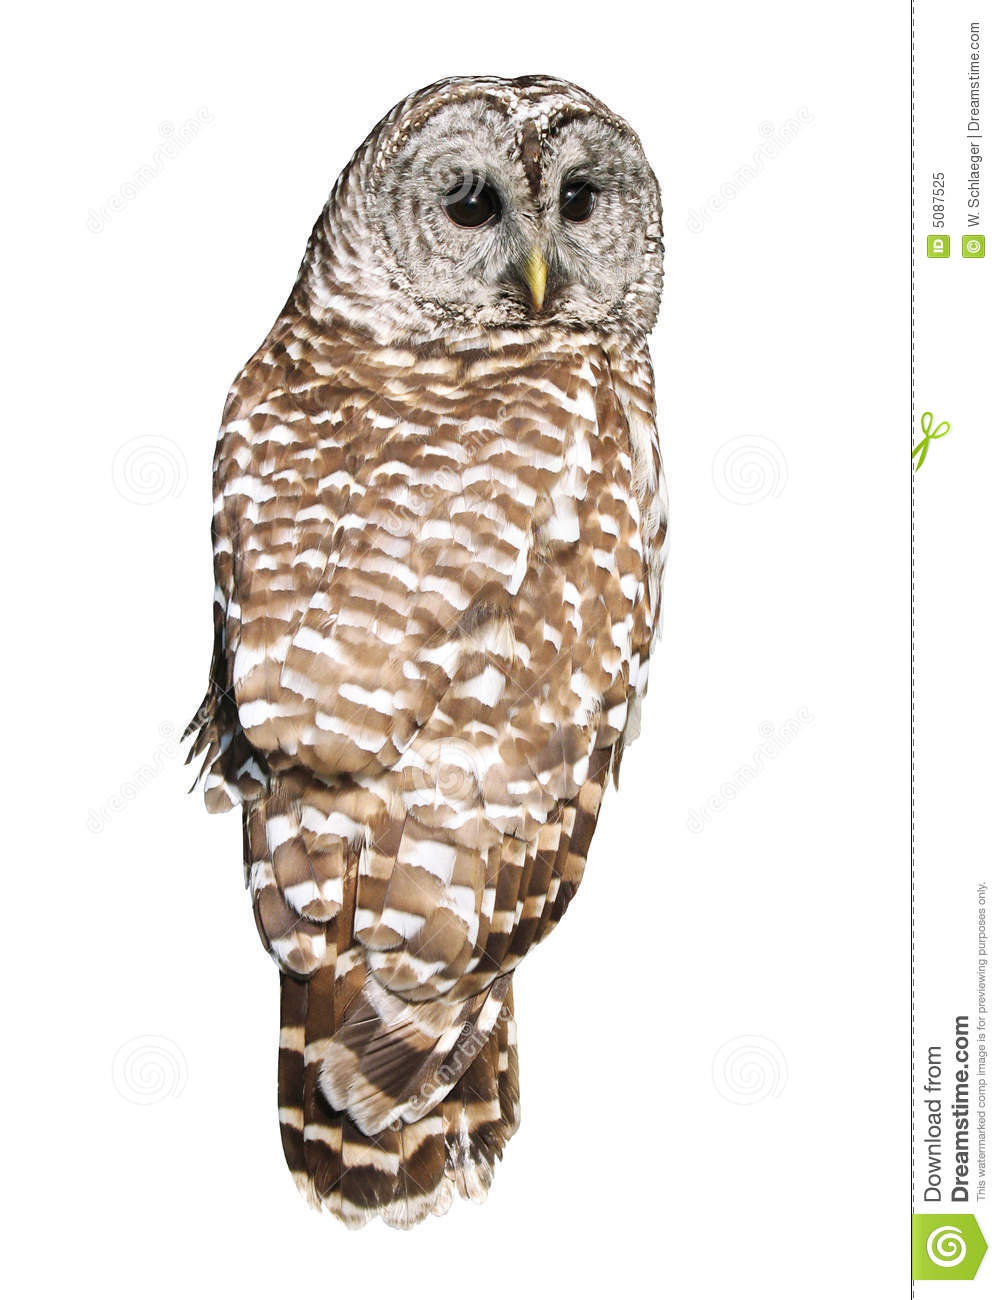 Barred Owl clipart #17, Download drawings